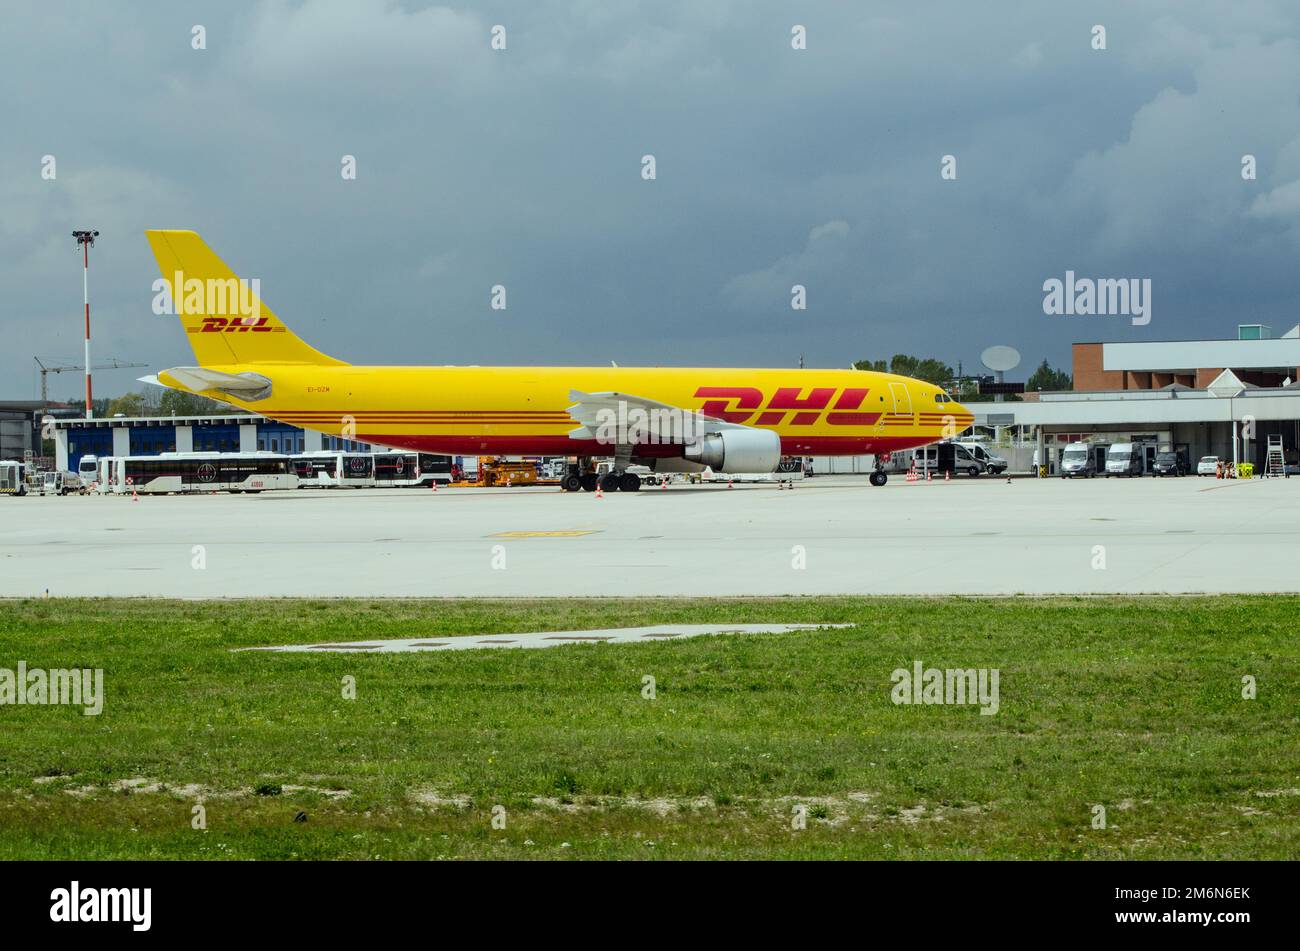 Venice, Italy - April 19, 2022: A DHL Airbus A300 cargo plane at Marco Polo Airport on a cloudy morning in Venice. Stock Photo